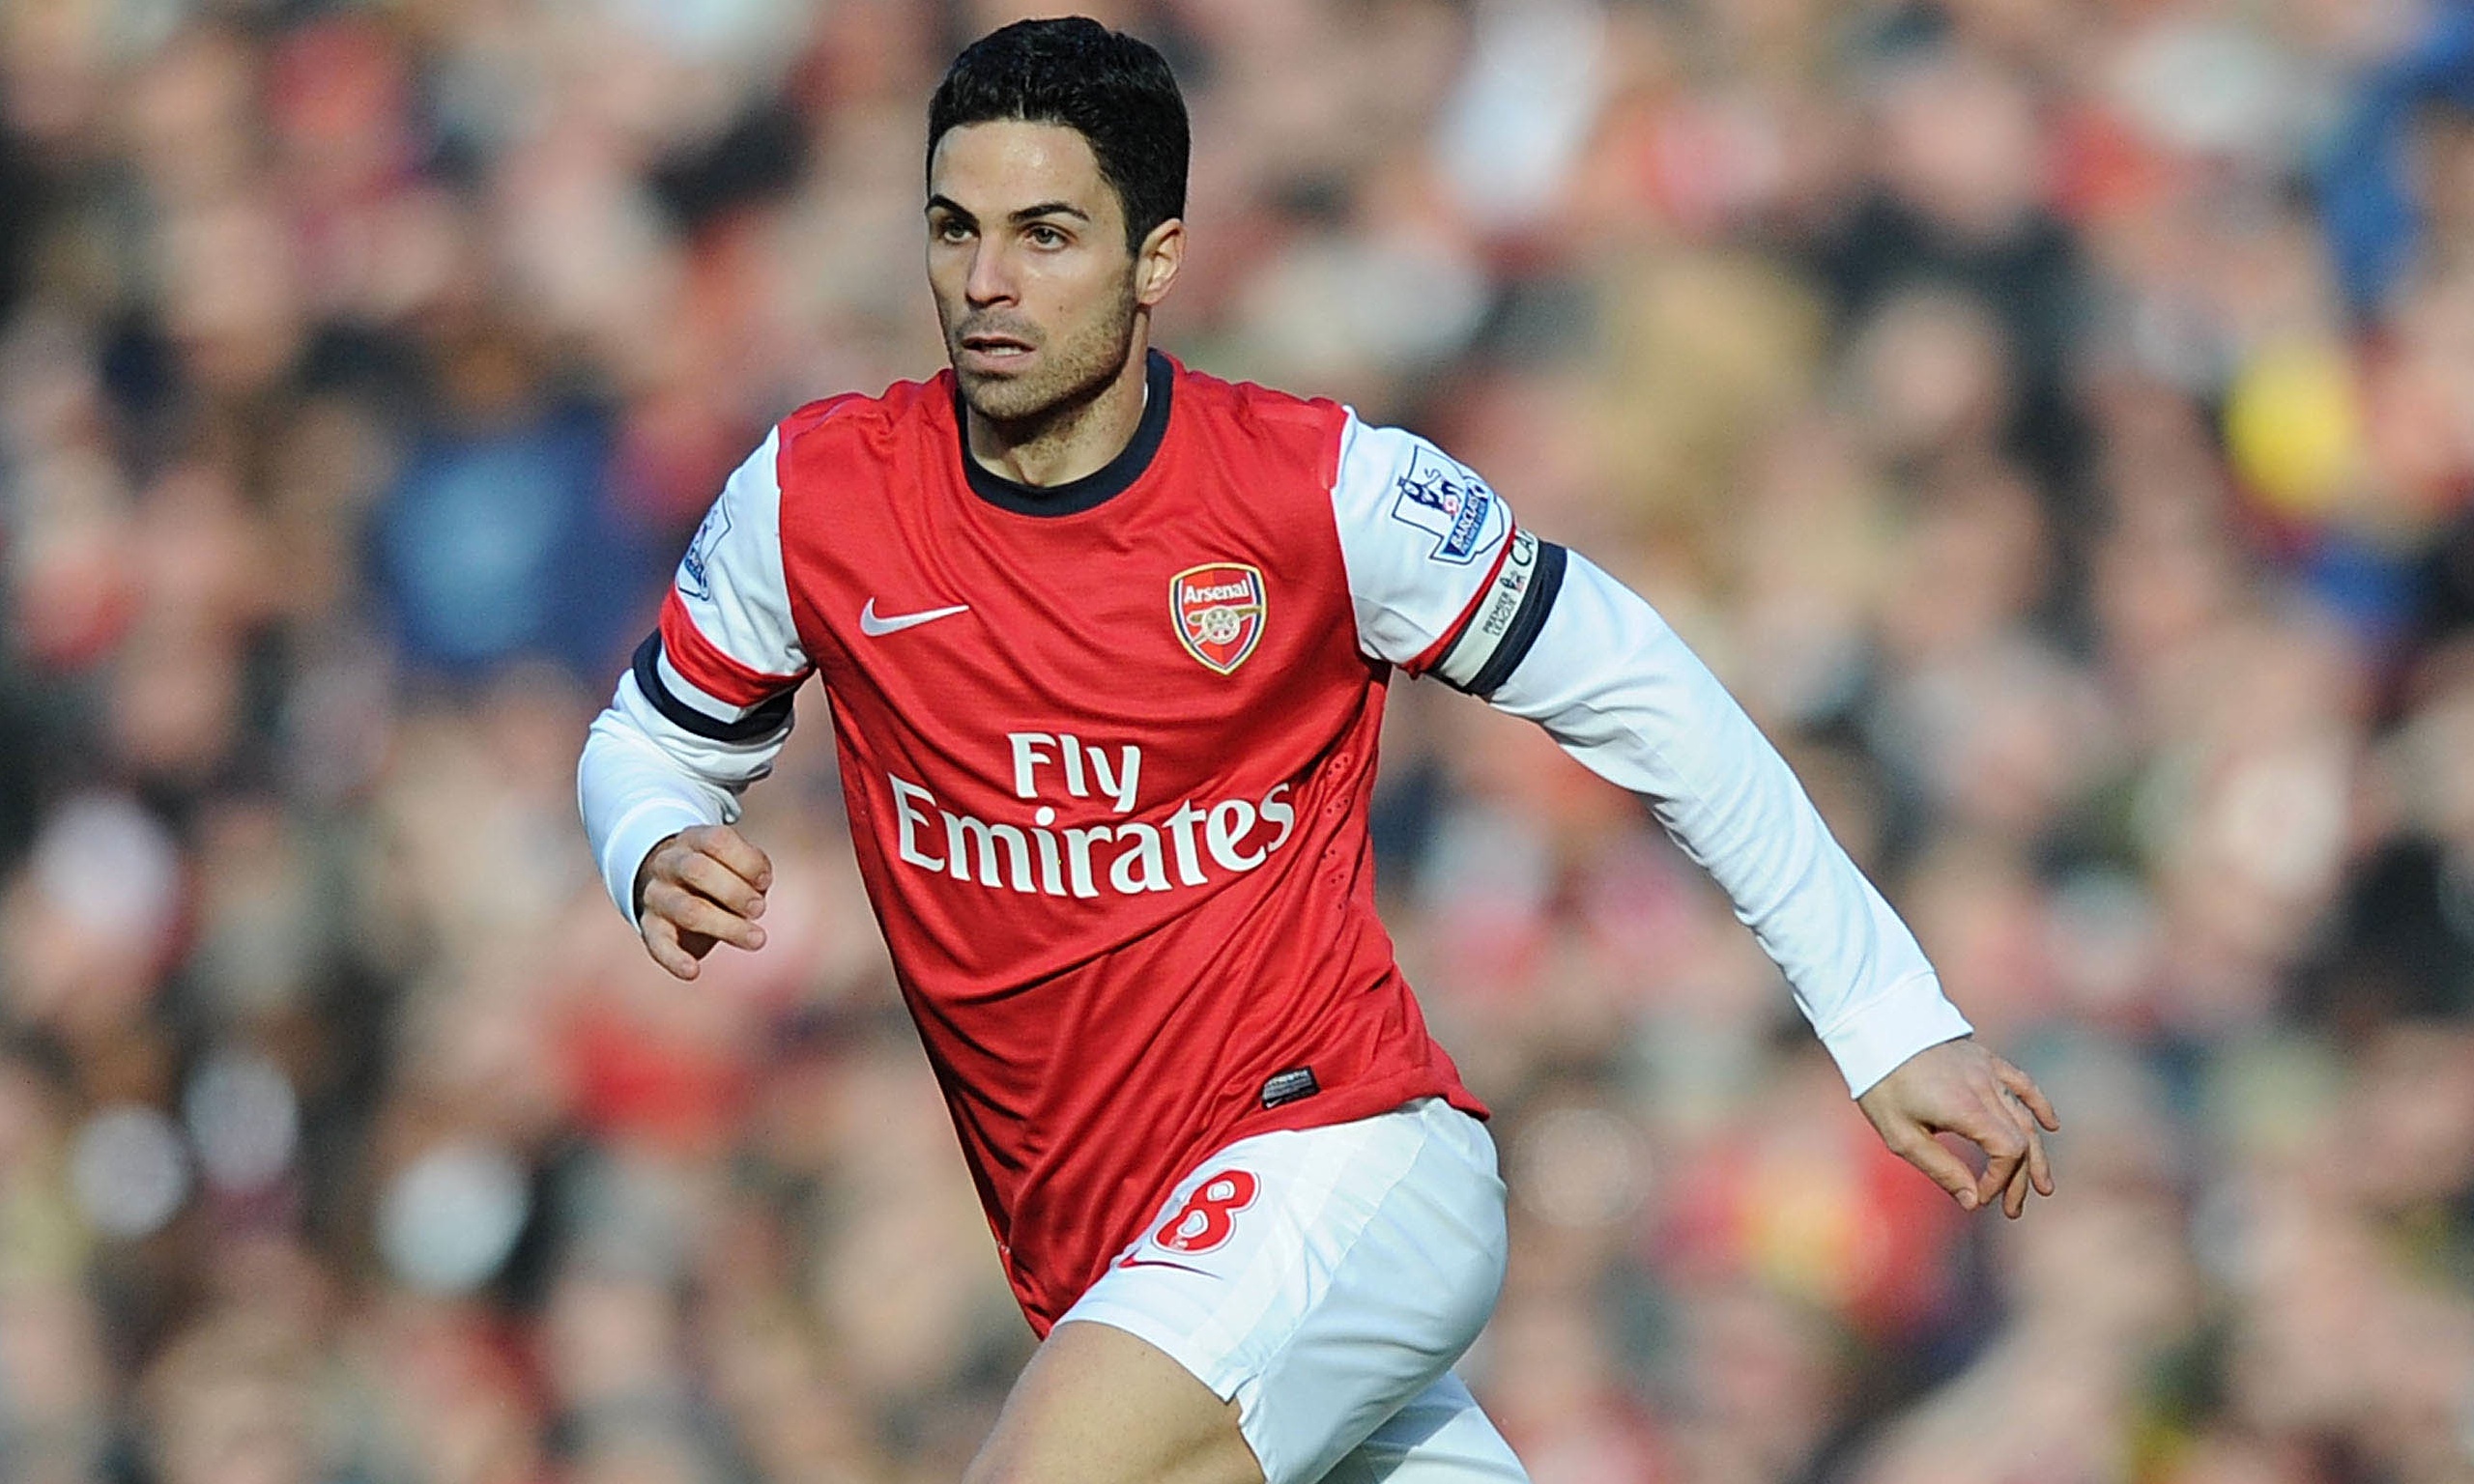 Arsenal's Mikel Arteta criticises Arsène Wenger's age-related contracts